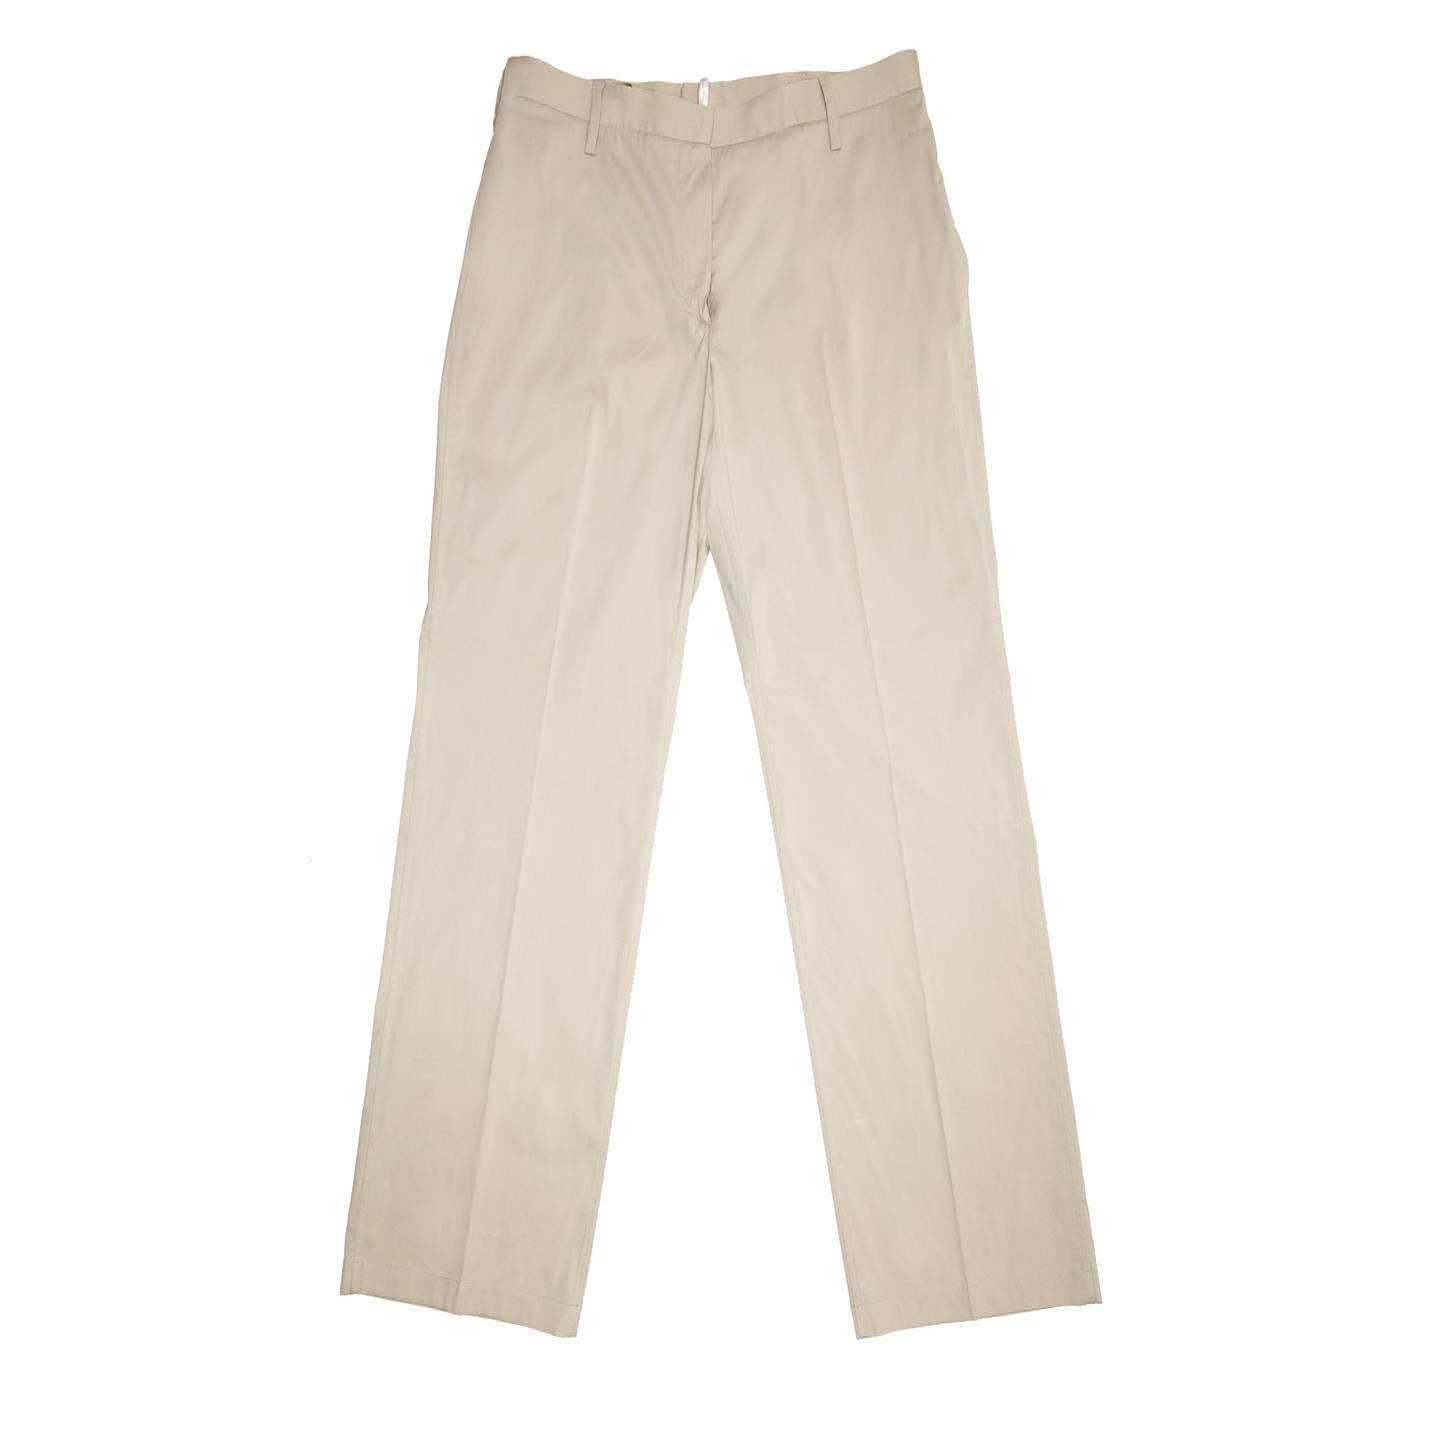 Light weight khaki cotton/elastane blend palazzo trousers with long and wide legs. The pants are suit pleated, the front is flat with a hidden hook closure at waist band, the slash pockets are on the side seams and one slit pocket sits at back. Made